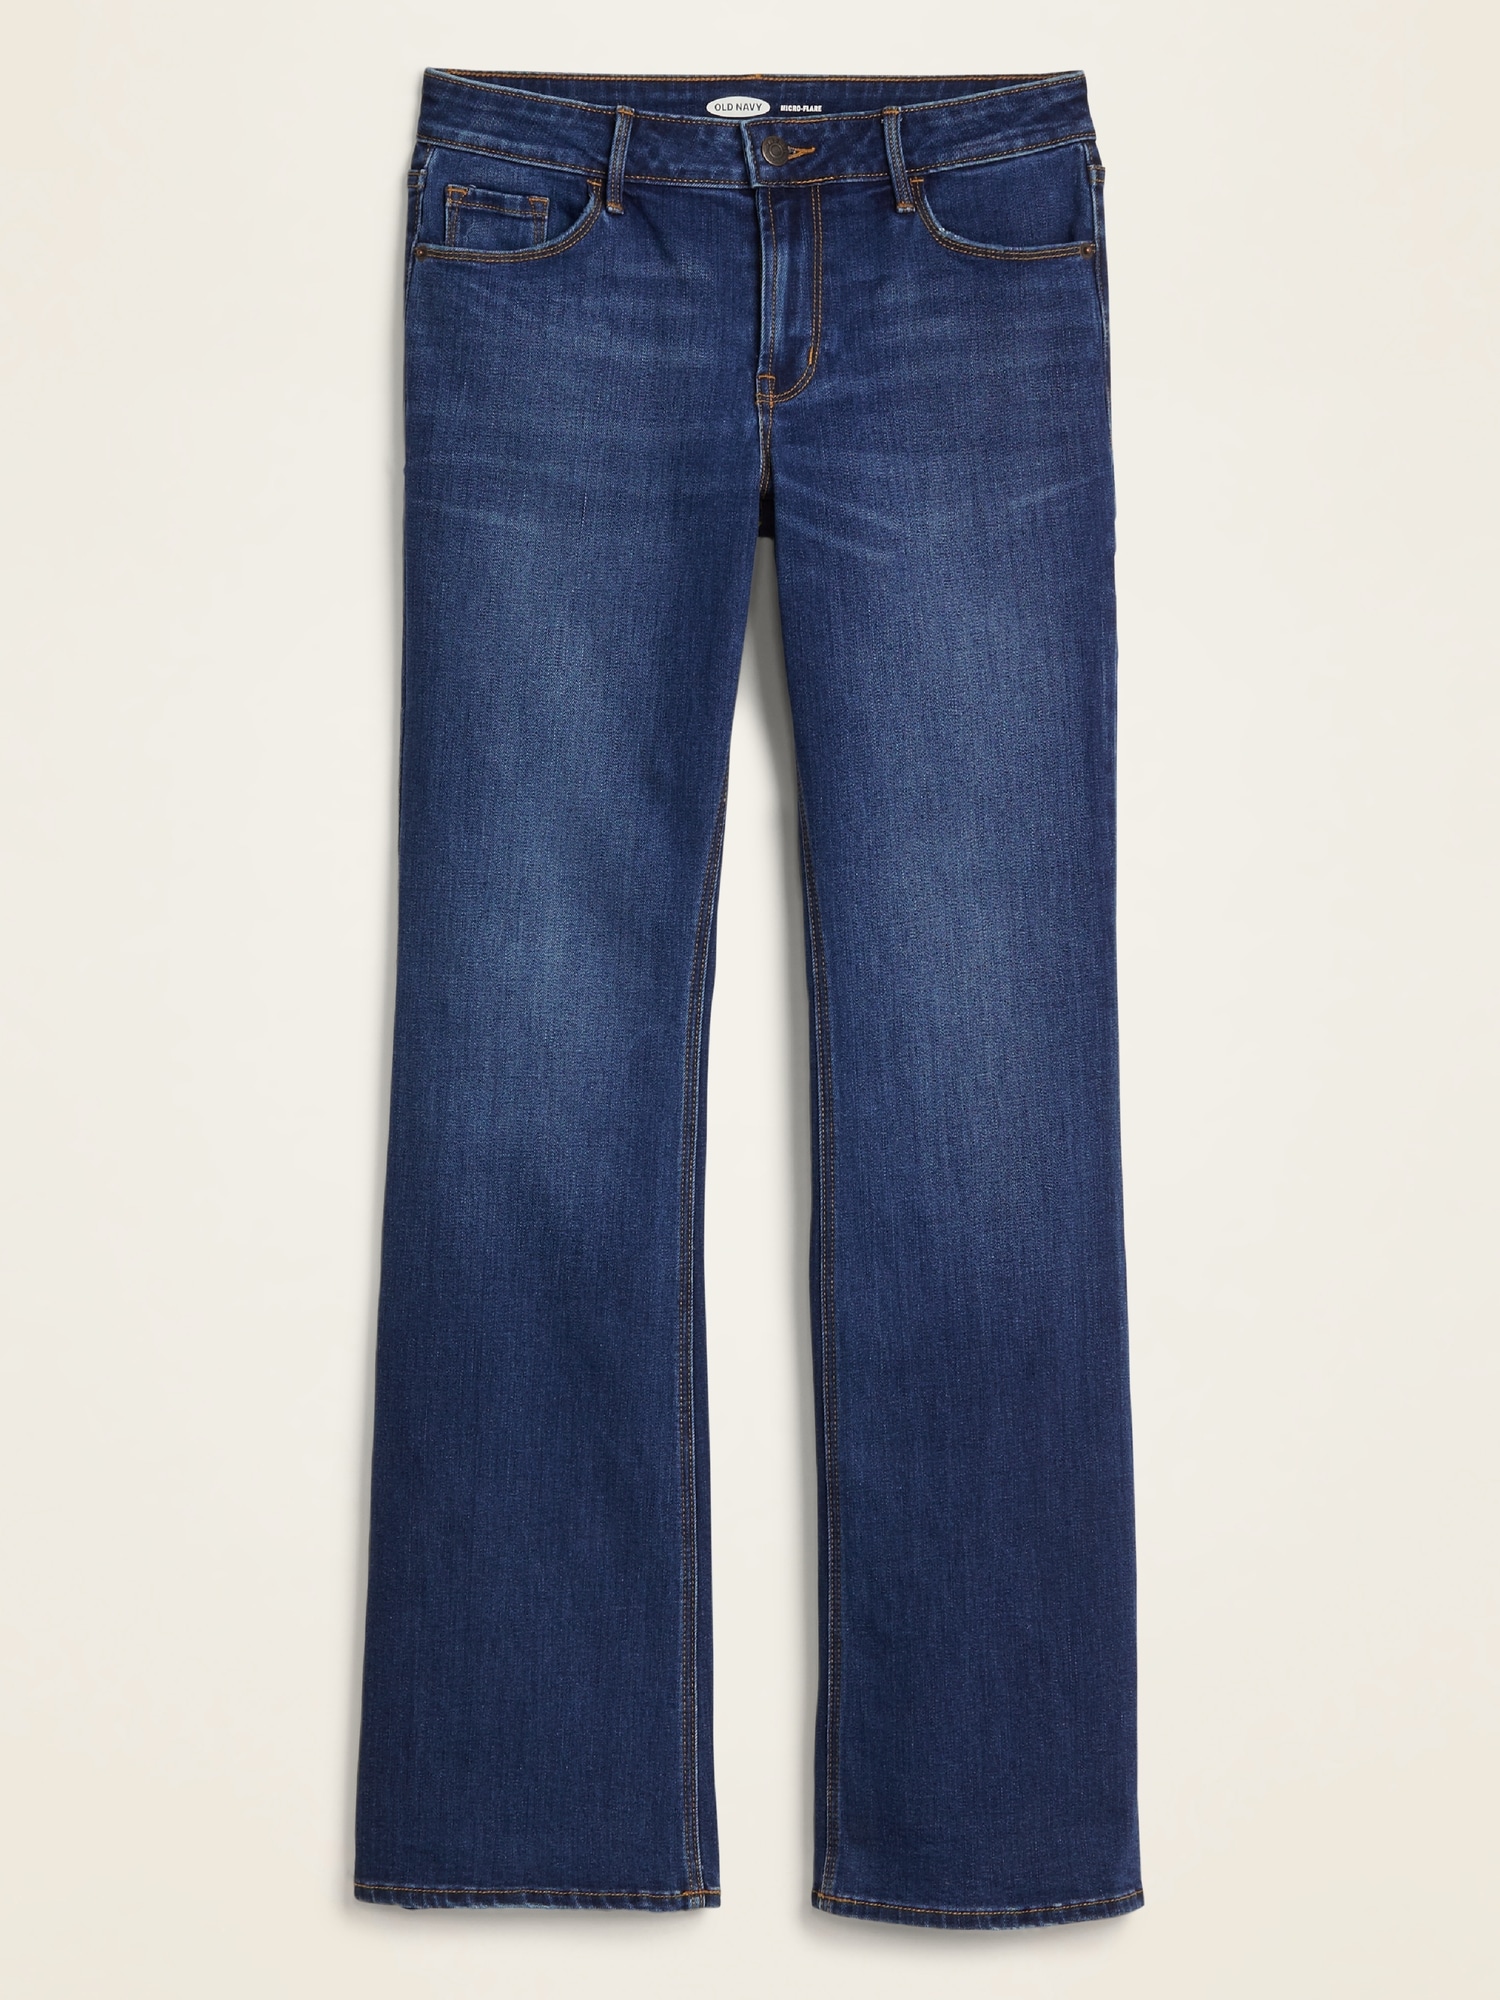 flare mid rise jeans